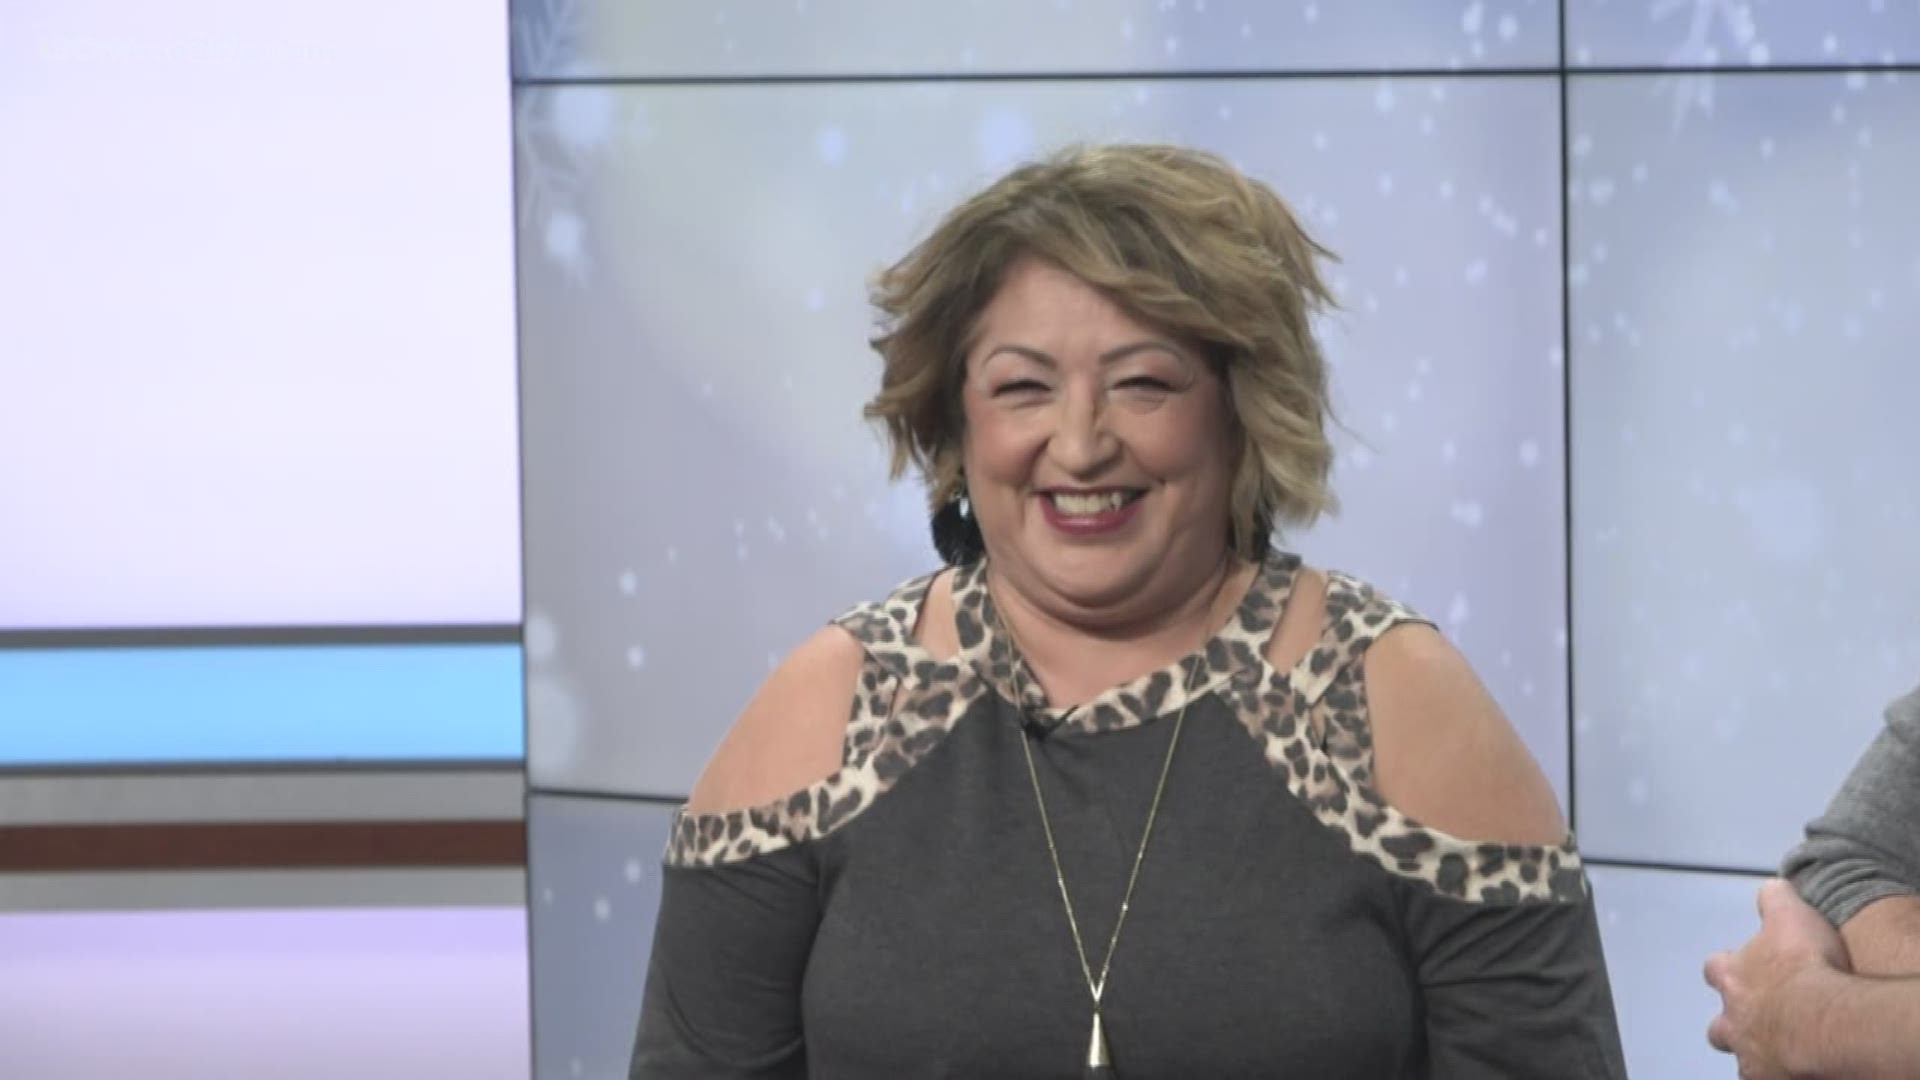 It's time to get a fresh look for the holidays. The Makeover Monday team from Matt Flora Hair Studio got to work on Diana Strickfaden to highlight her beautiful feat